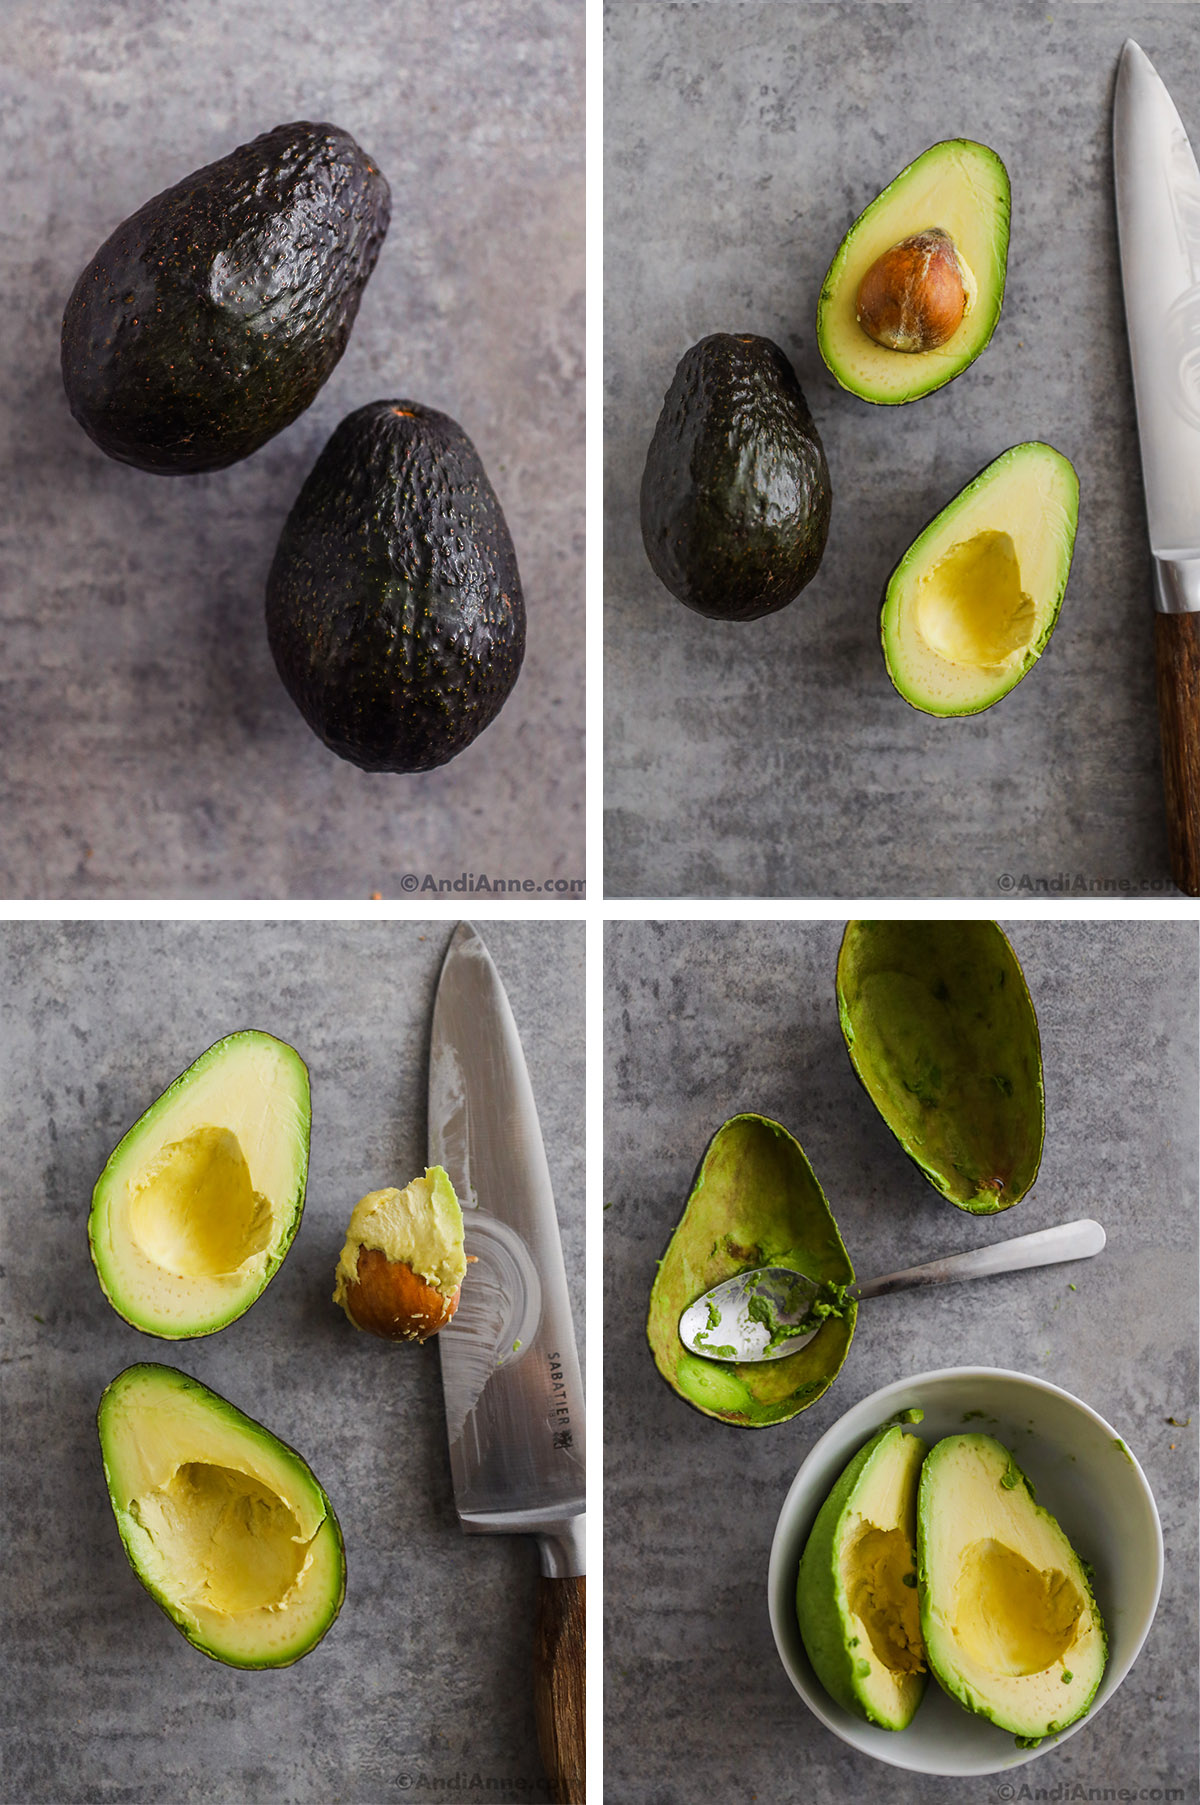 Four images showing two avocados being sliced with a knife and scooped with a spoon.